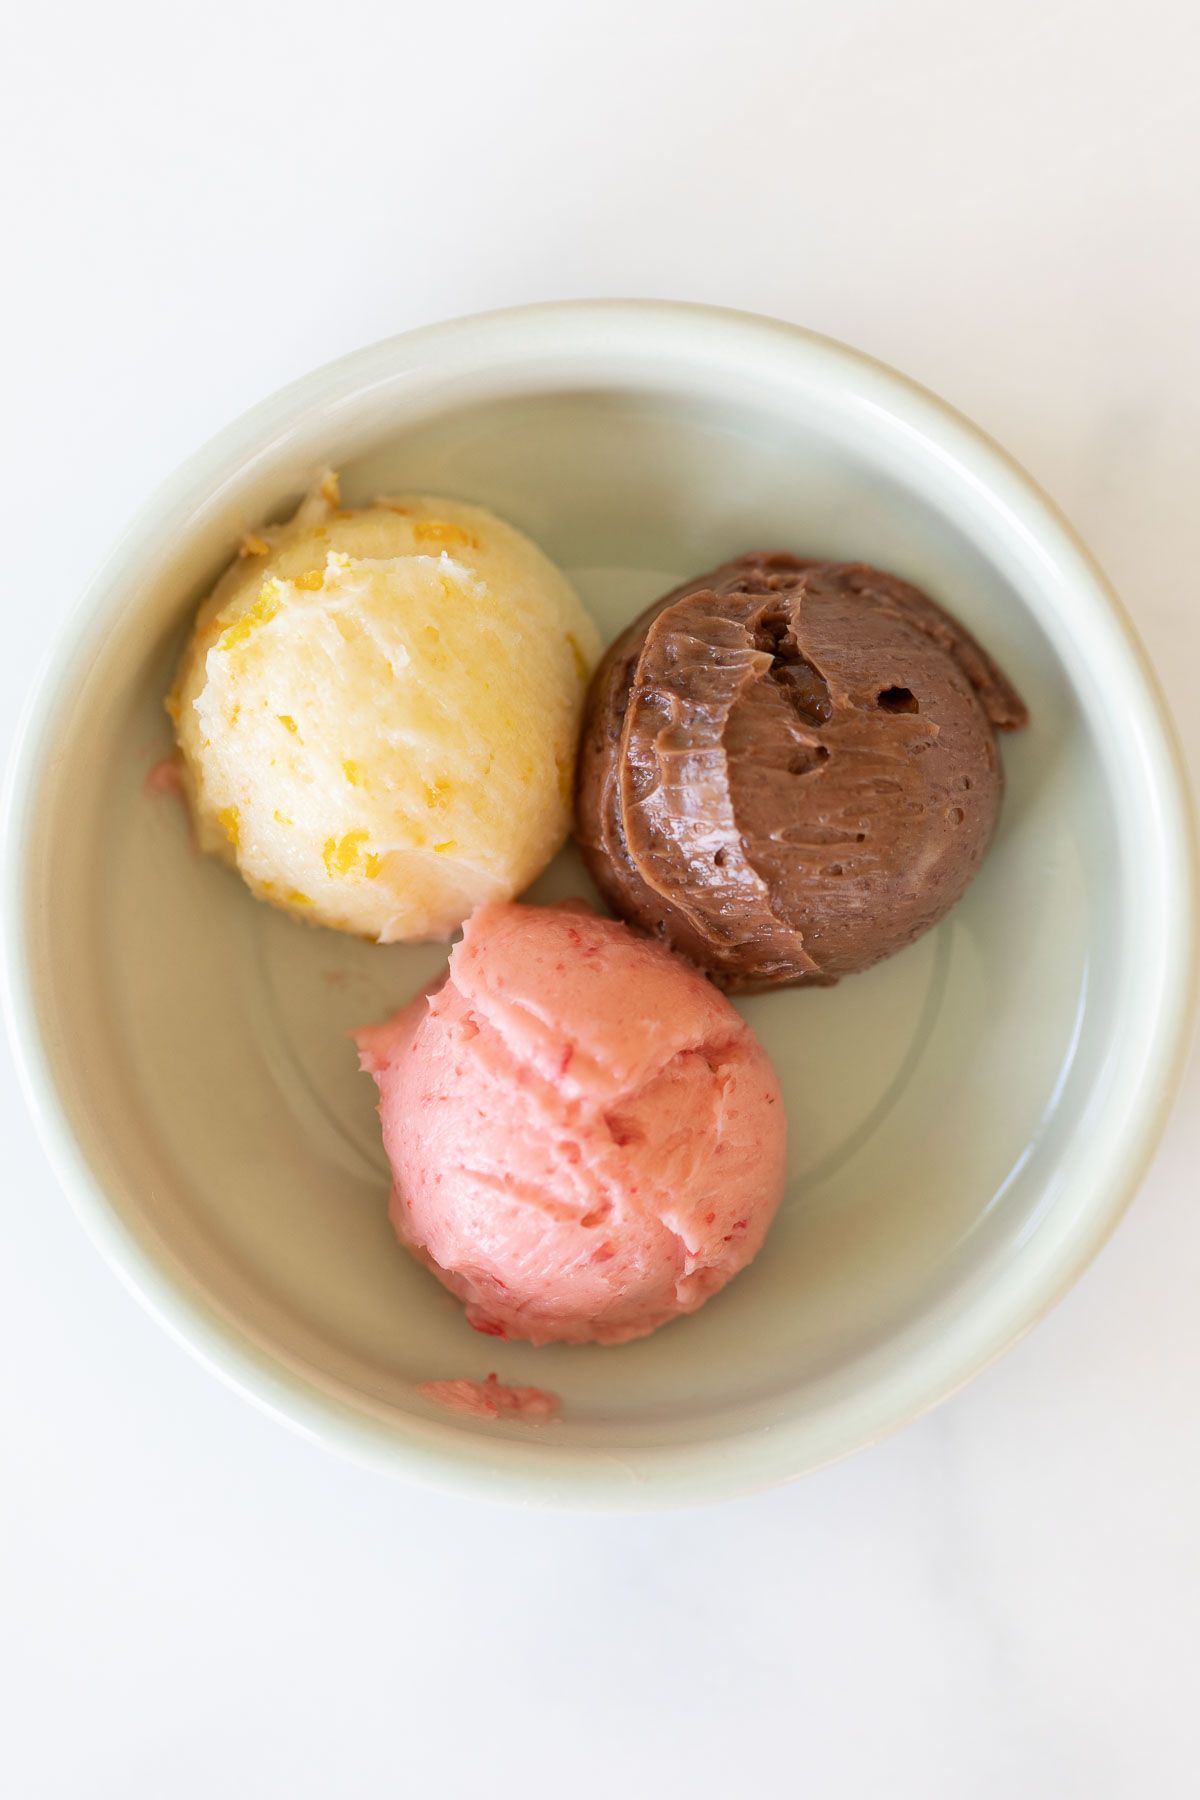 A white bowl on a marble surface, filled with three scoops of flavored butters.